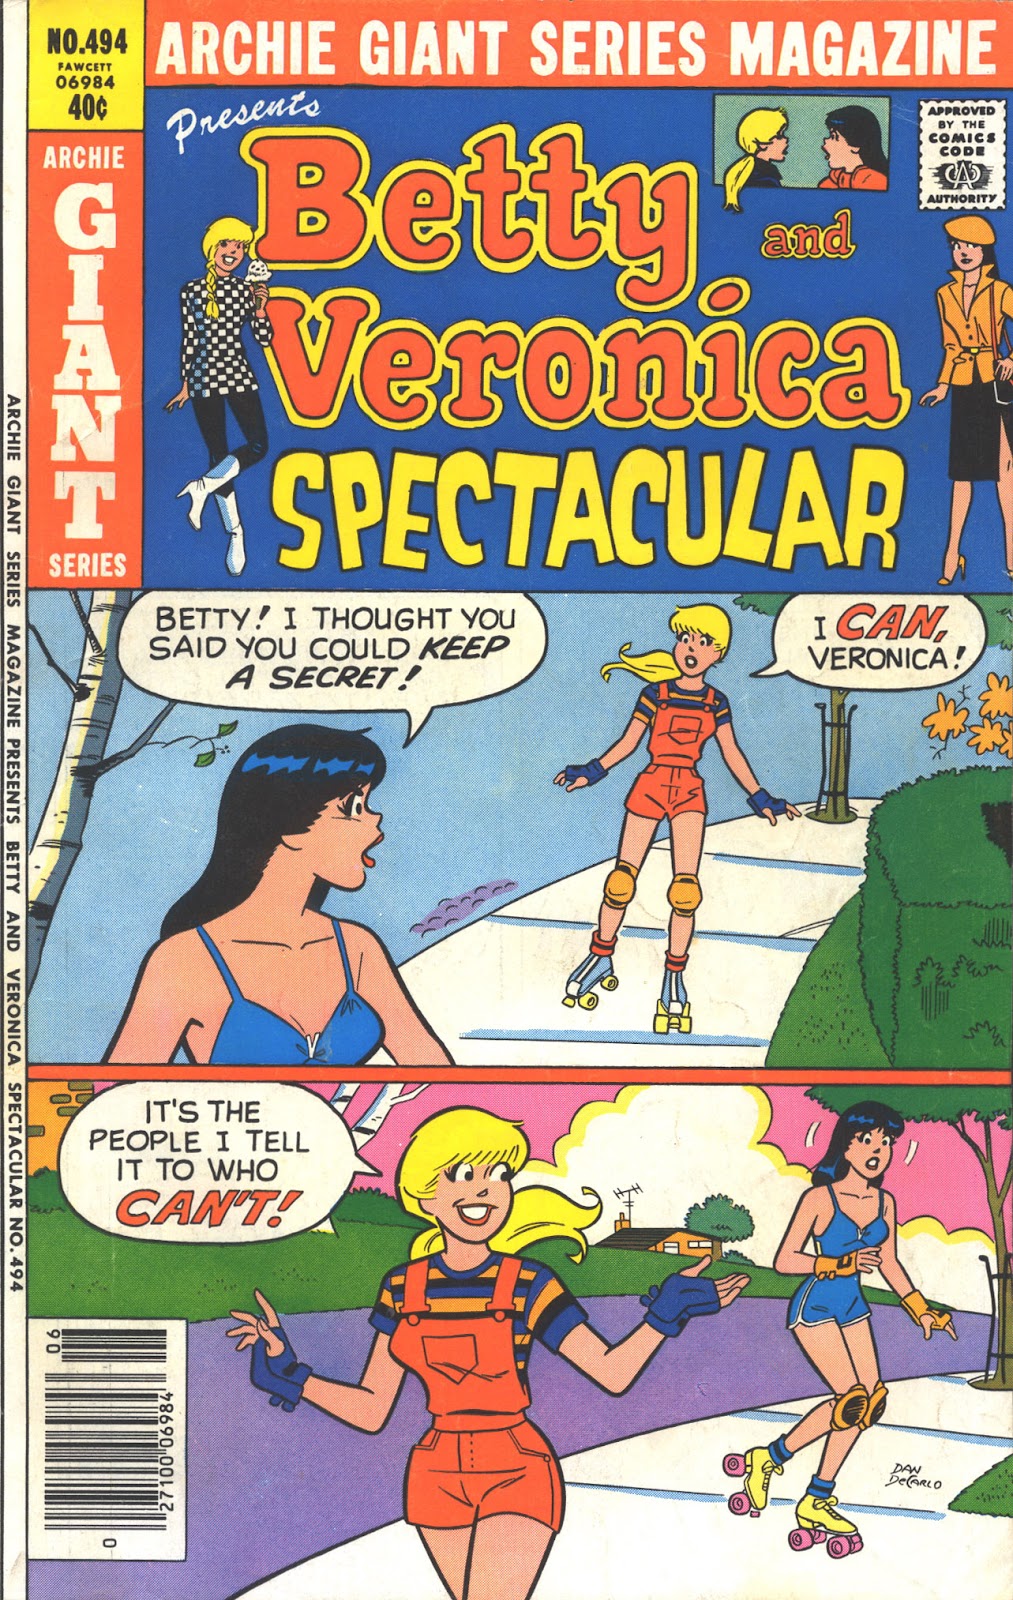 Archie Giant Series Magazine 494 Page 1